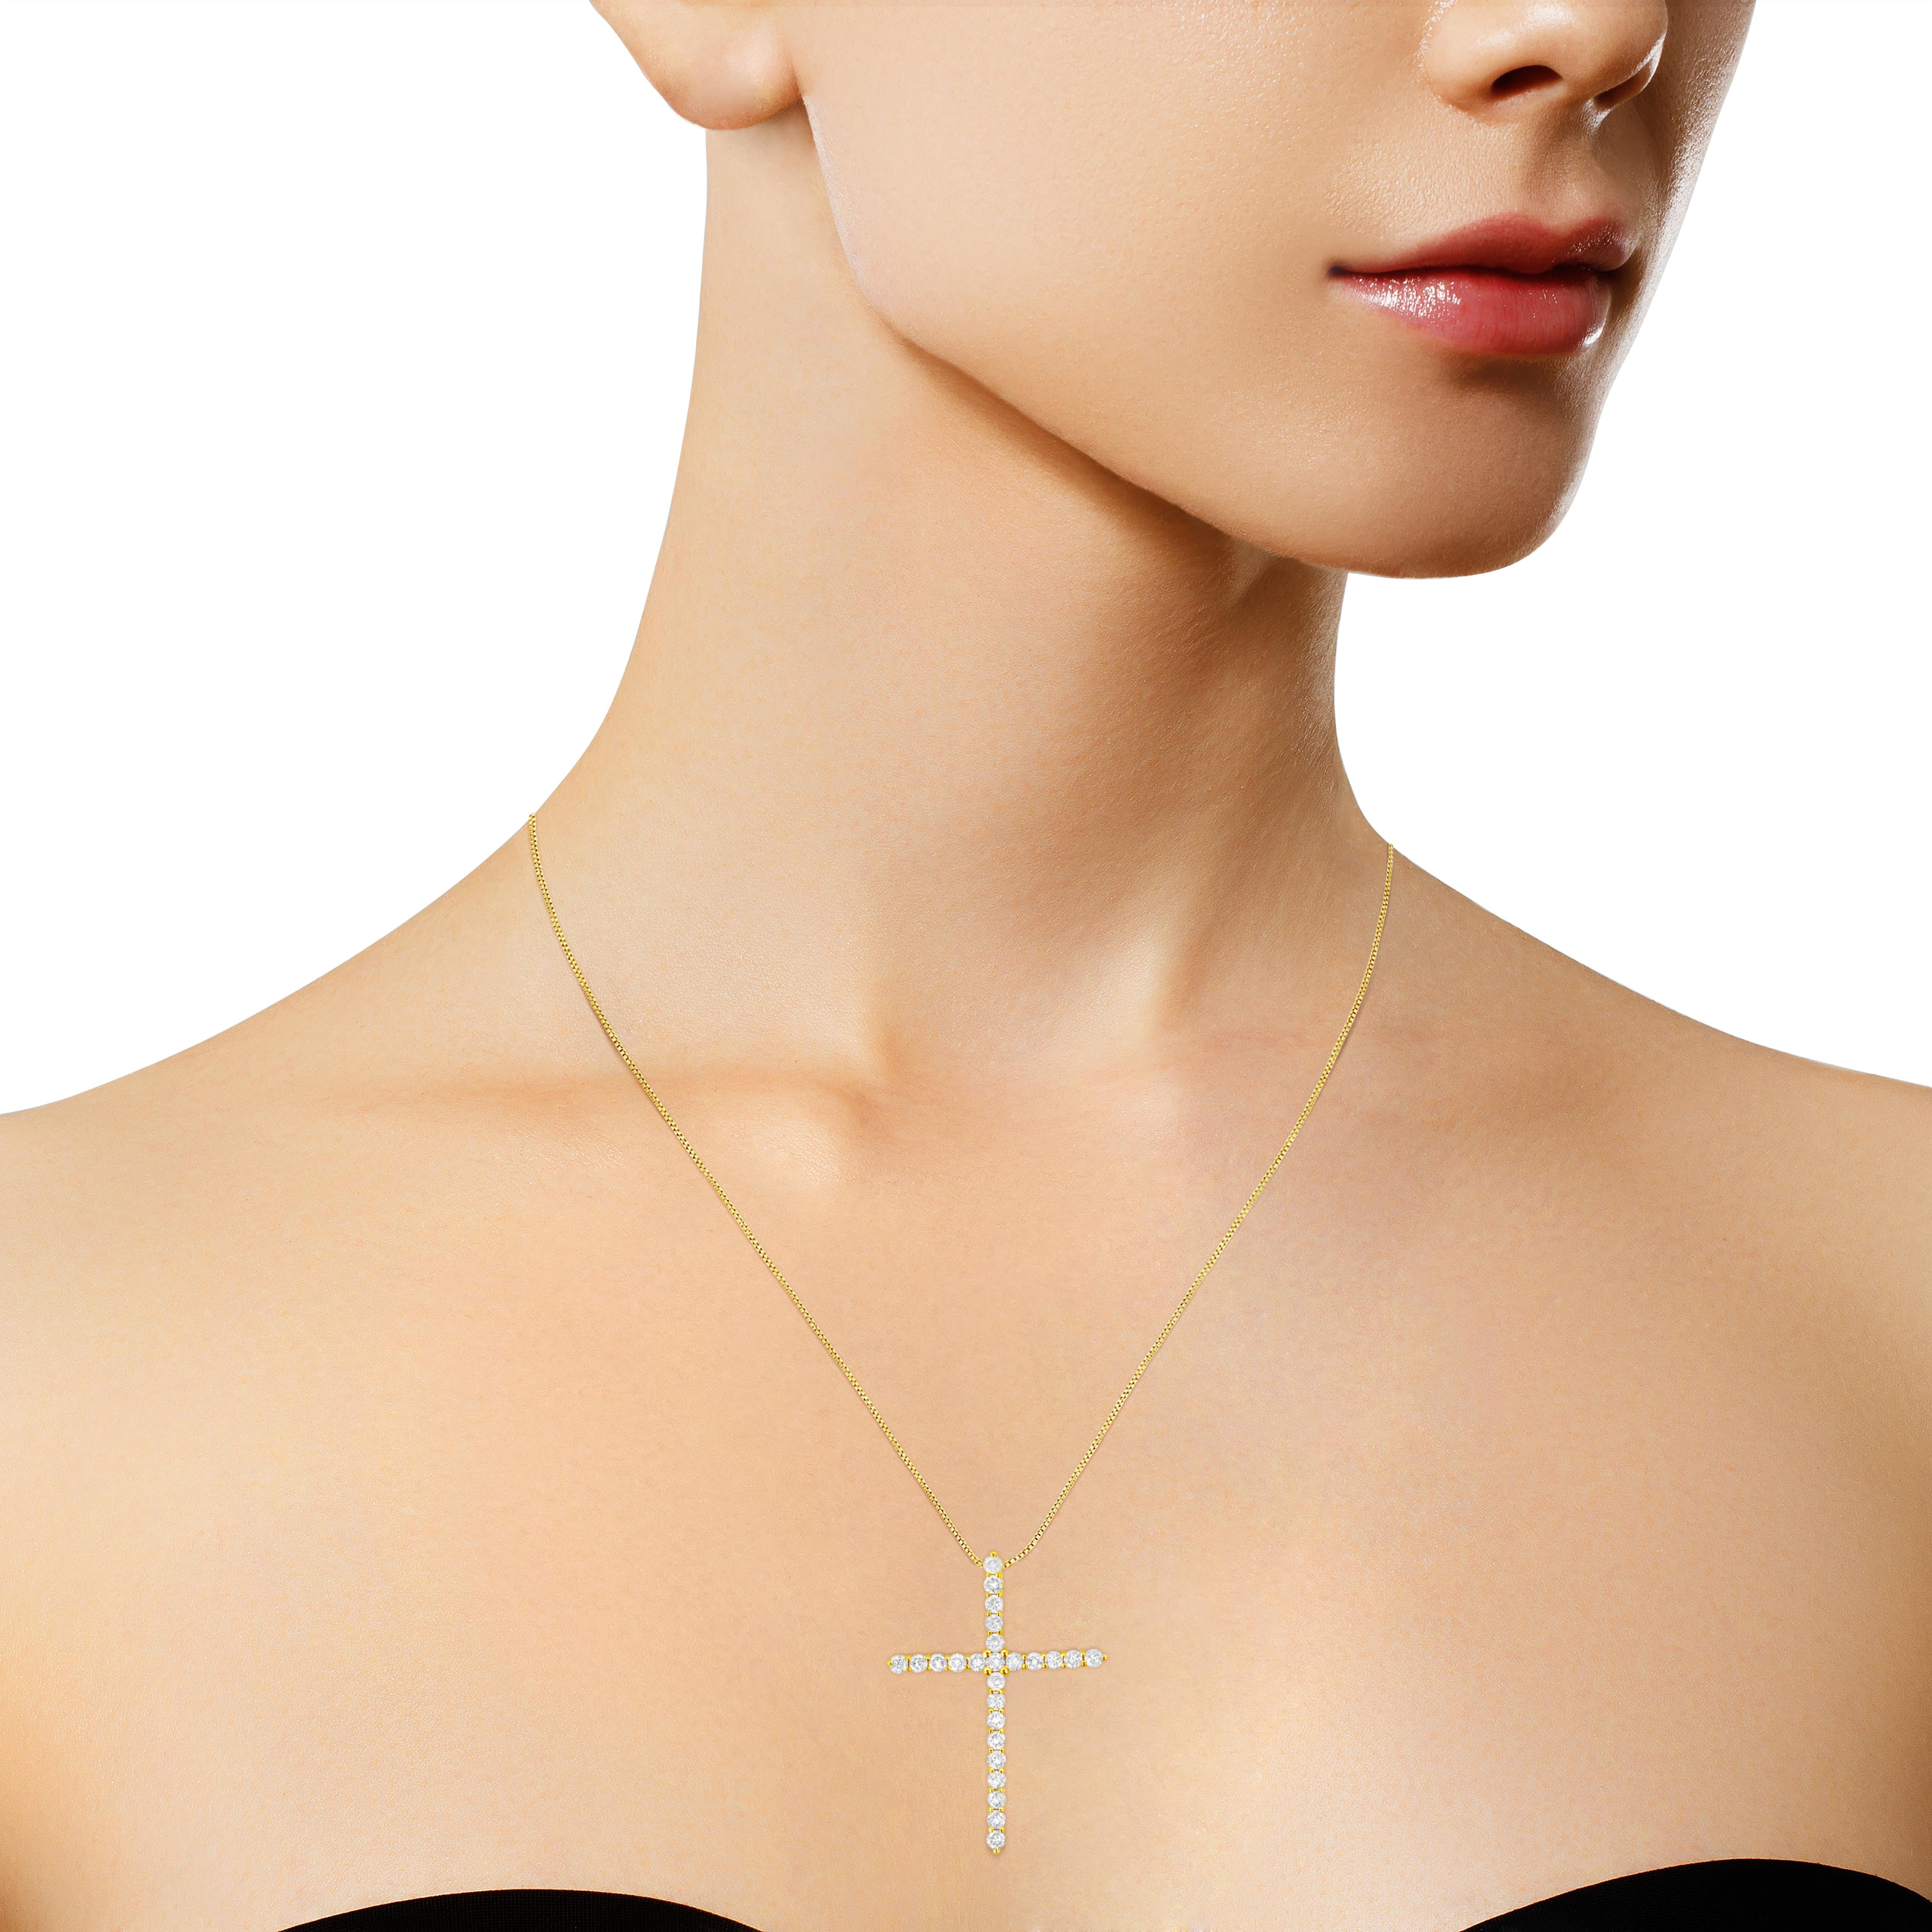 Women's 10K Yellow Gold 2.0 Cttw Round Diamond Cross Pendant Necklace with Box Chain For Sale